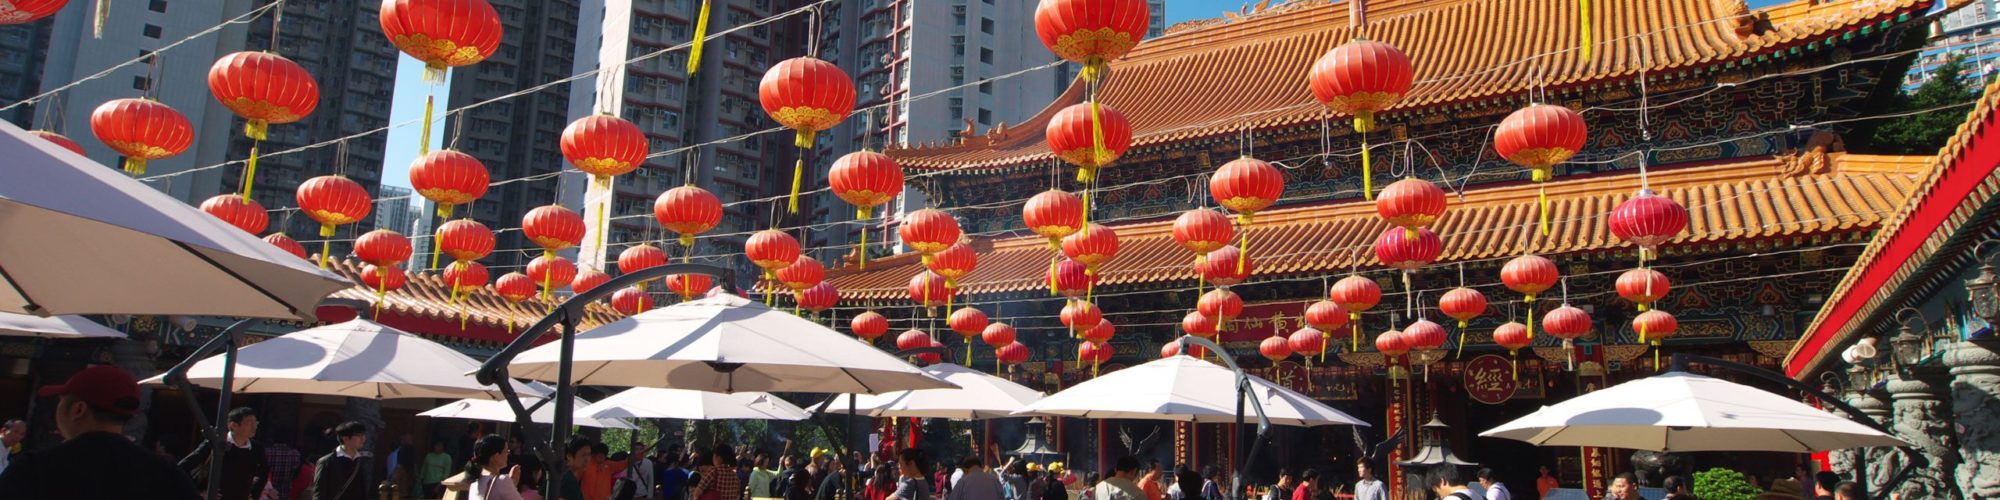 Kowloon travel agents packages deals